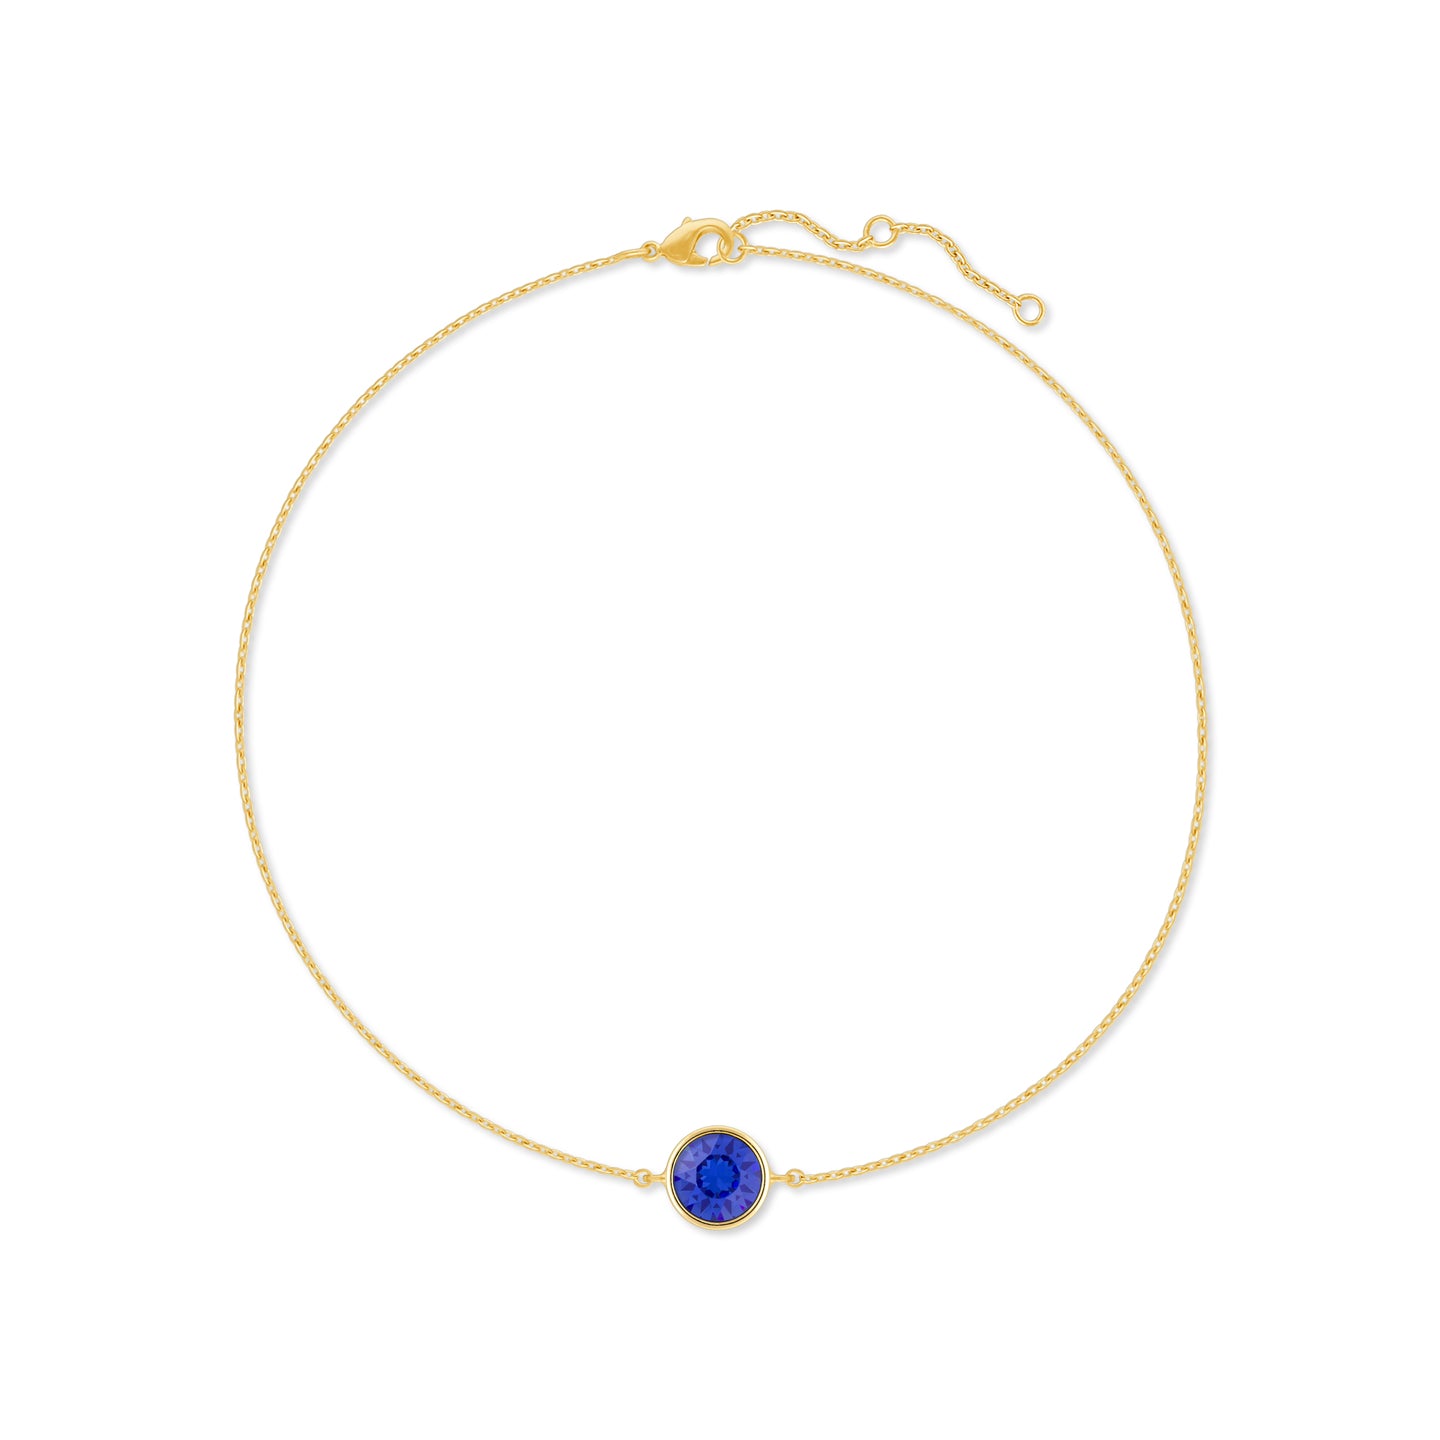 Harley Chain Bracelet with Blue Sapphire Round Crystals from Swarovski Gold Plated - Ed Heart